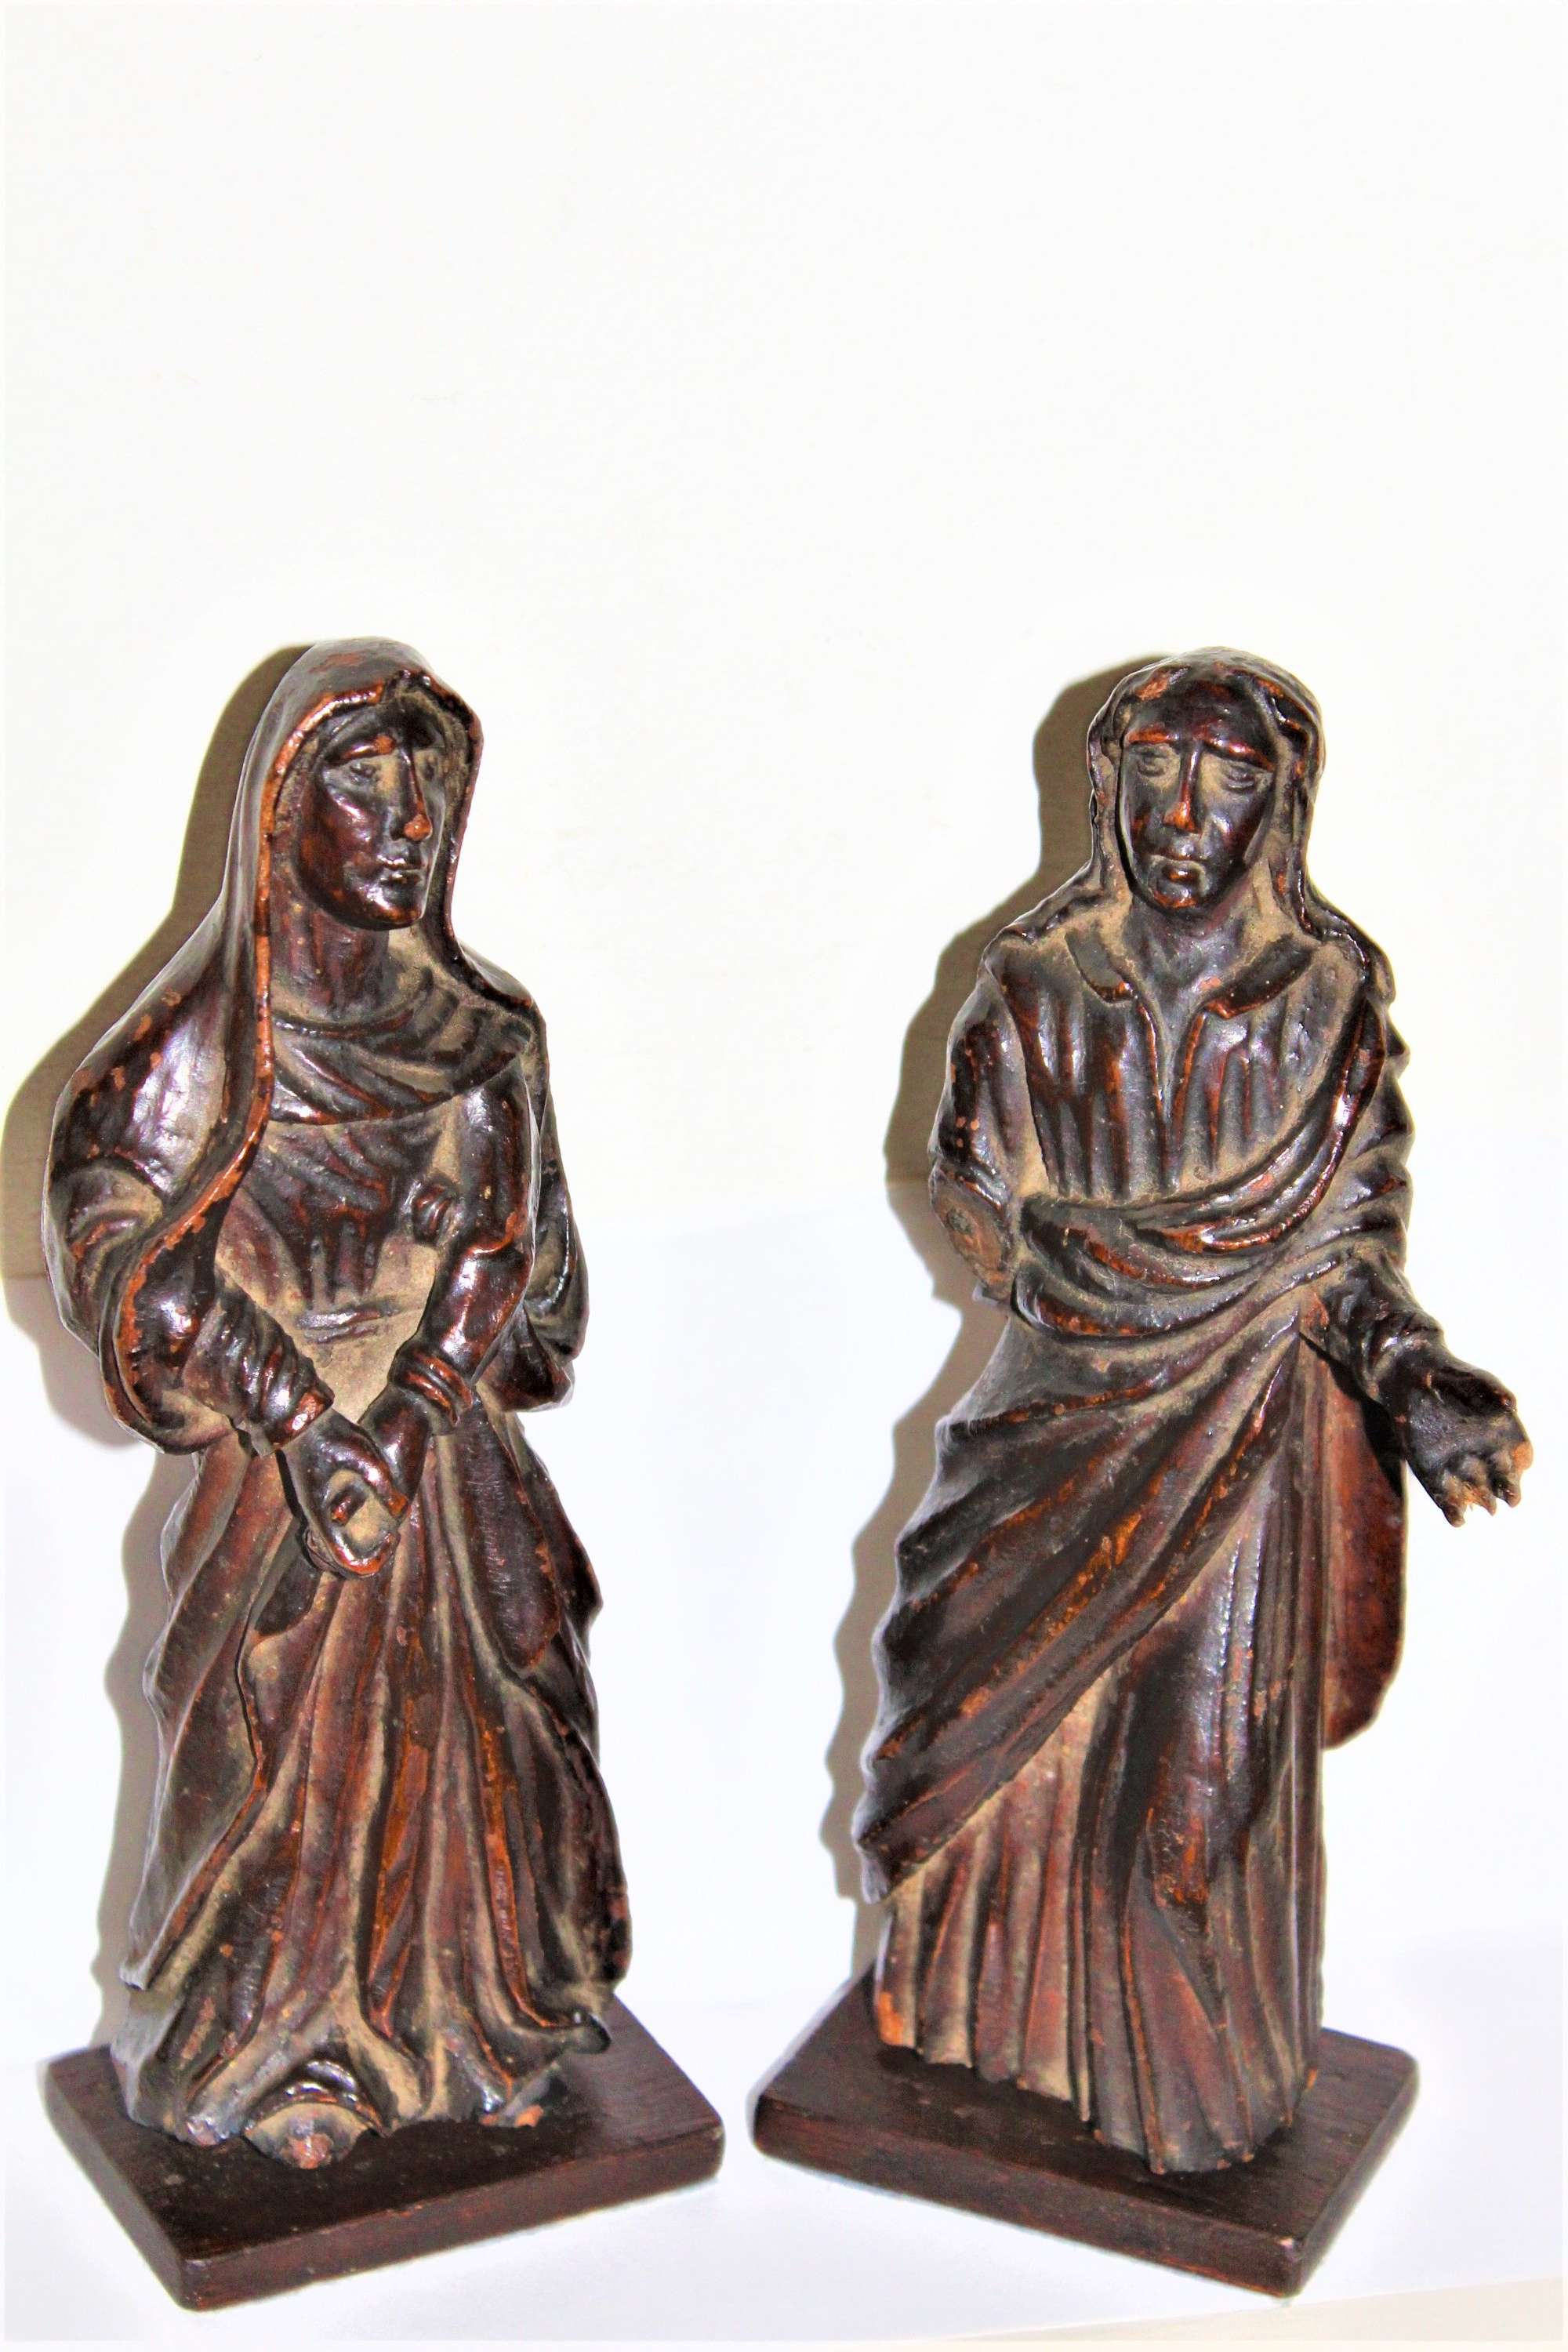 Pair Of Well Carved Early Religious Wood Figures Circa 1650